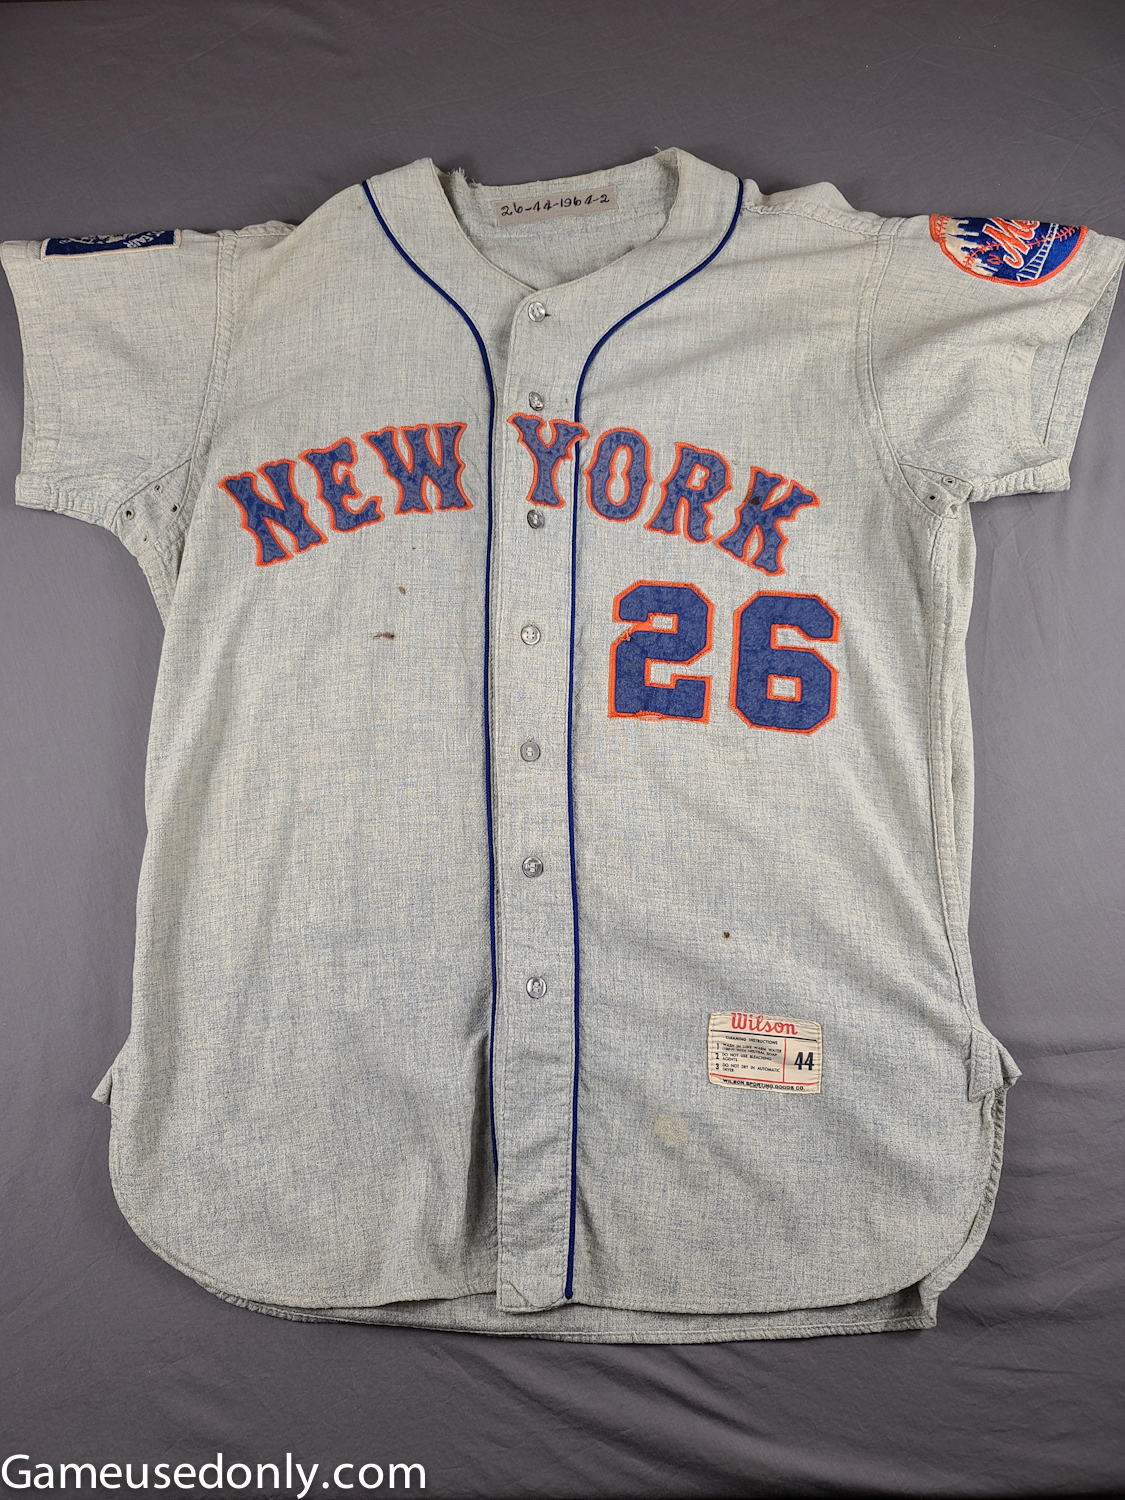 New-York-Mets-Game-Used-Jersey-1964-1956-Flannel-Galen-Cisco